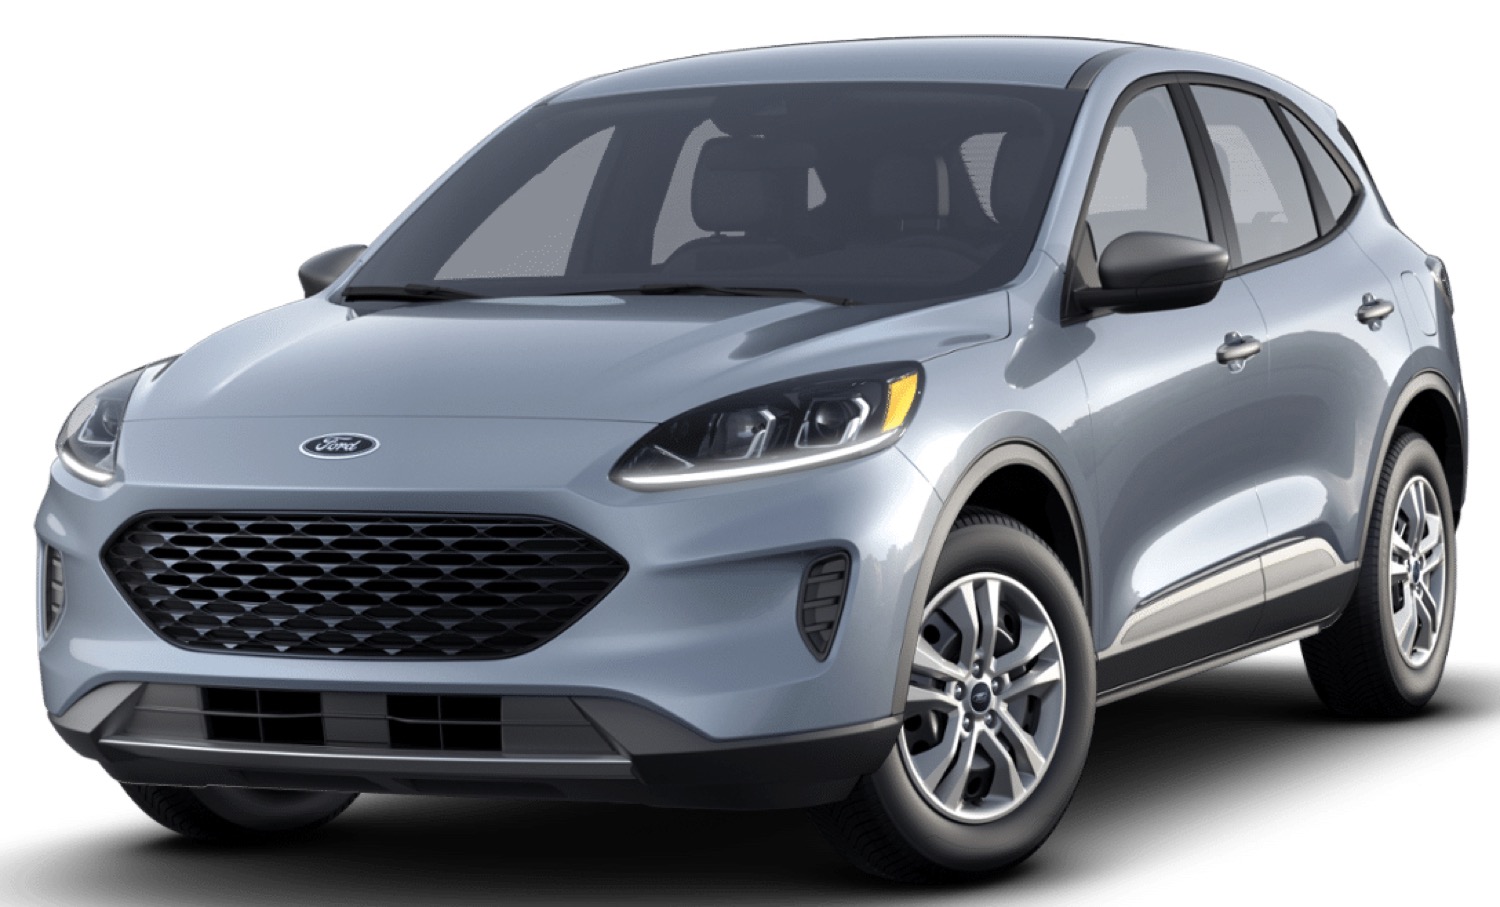 2022 Ford Escape Gains New Iced Blue Silver Metallic Color: First Look